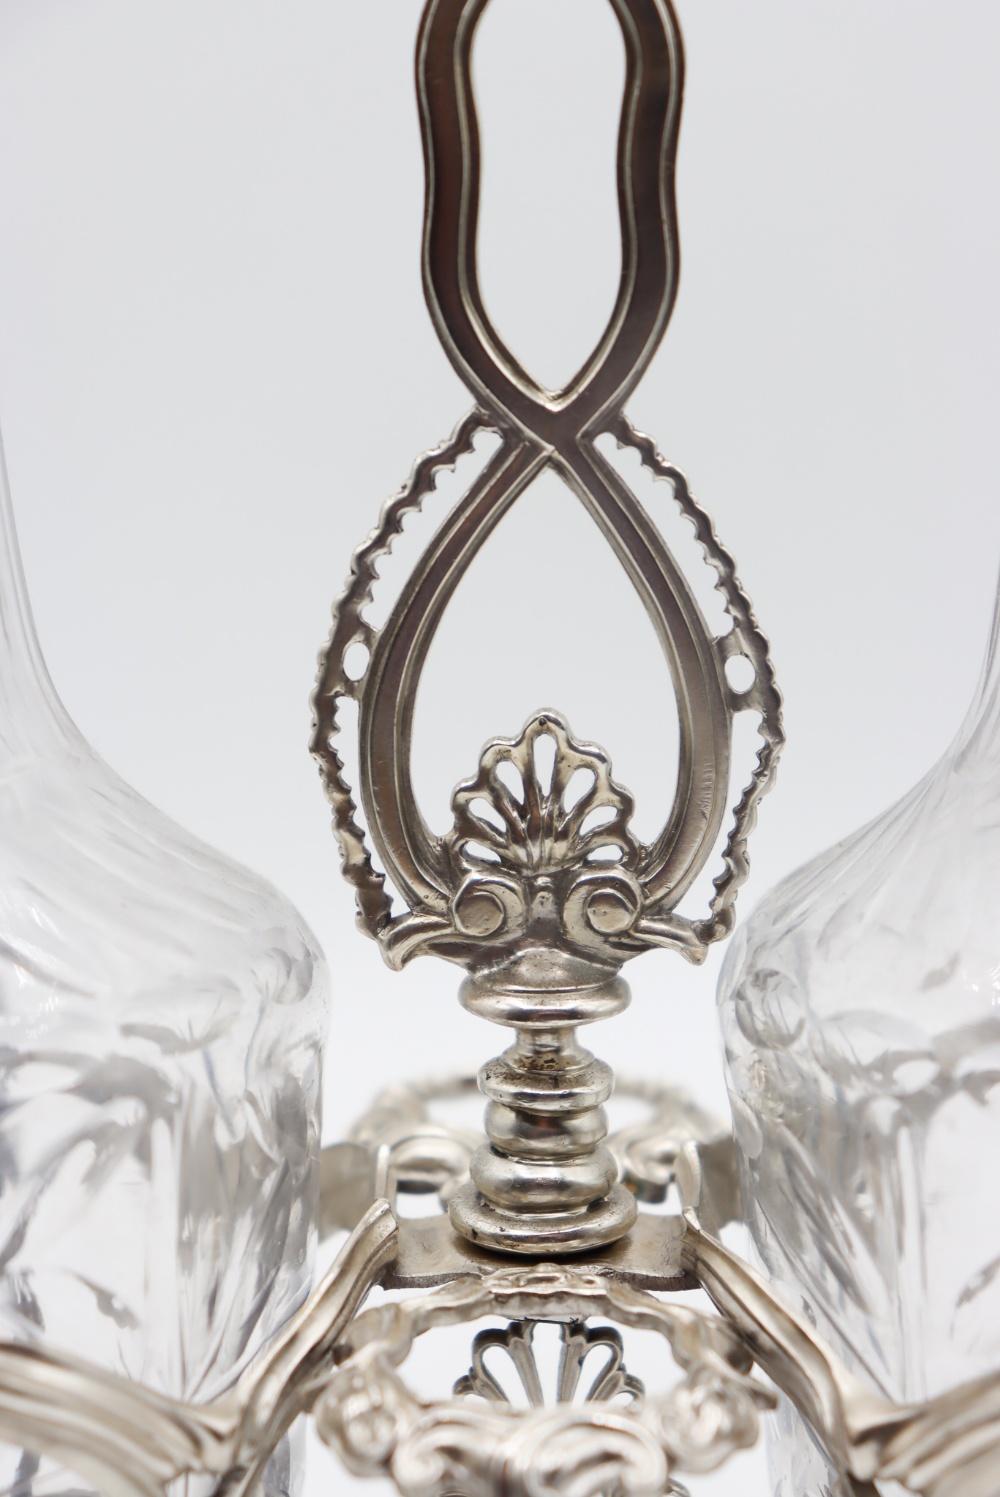 Glass Decanter Service Rack - Image 3 of 12